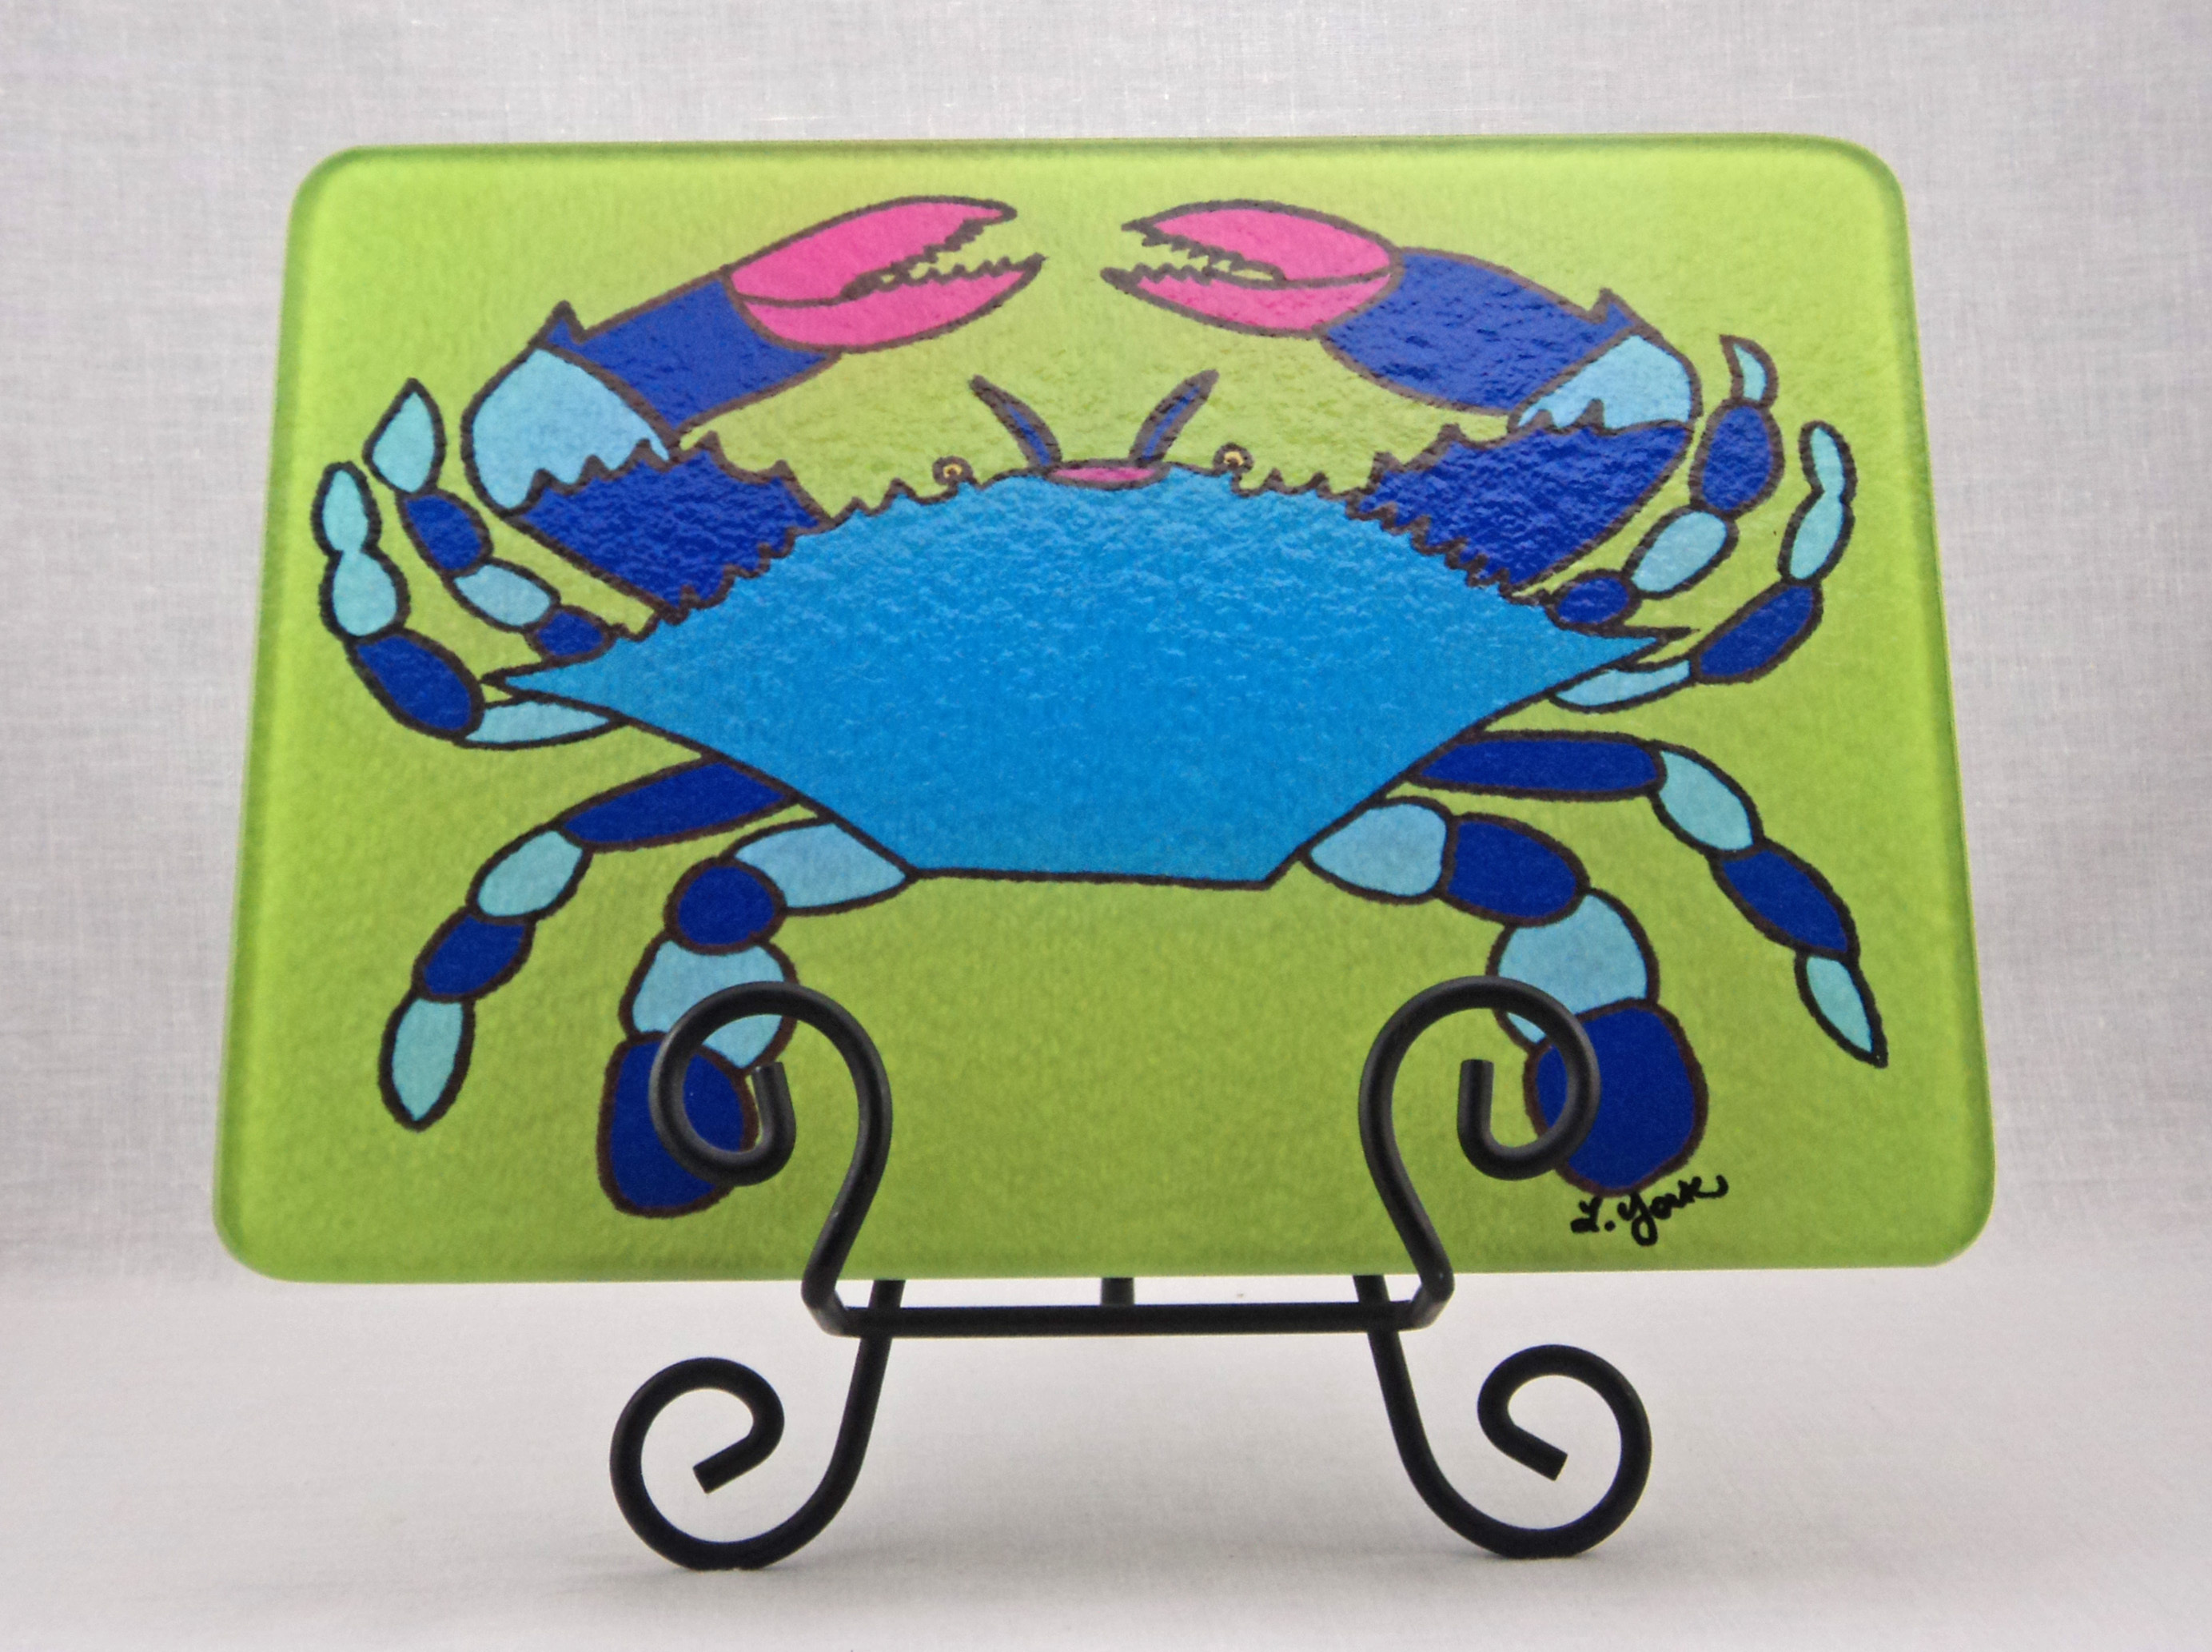 Blue Crab Cutting Board made with sublimation printing